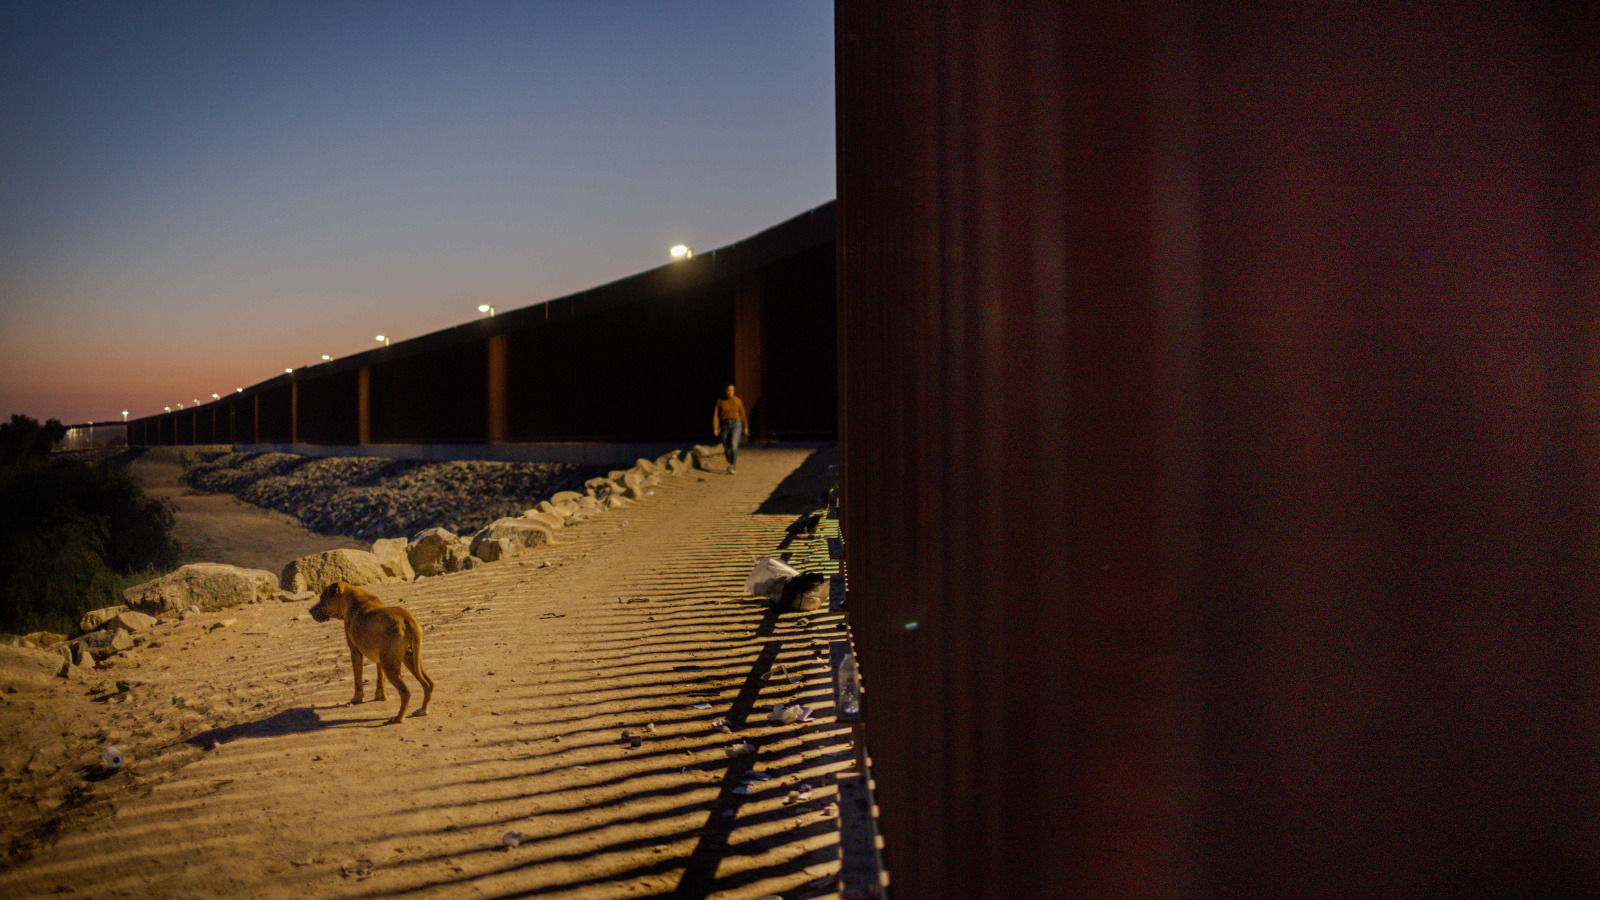 Smugglers are steering migrants into the remote Arizona desert